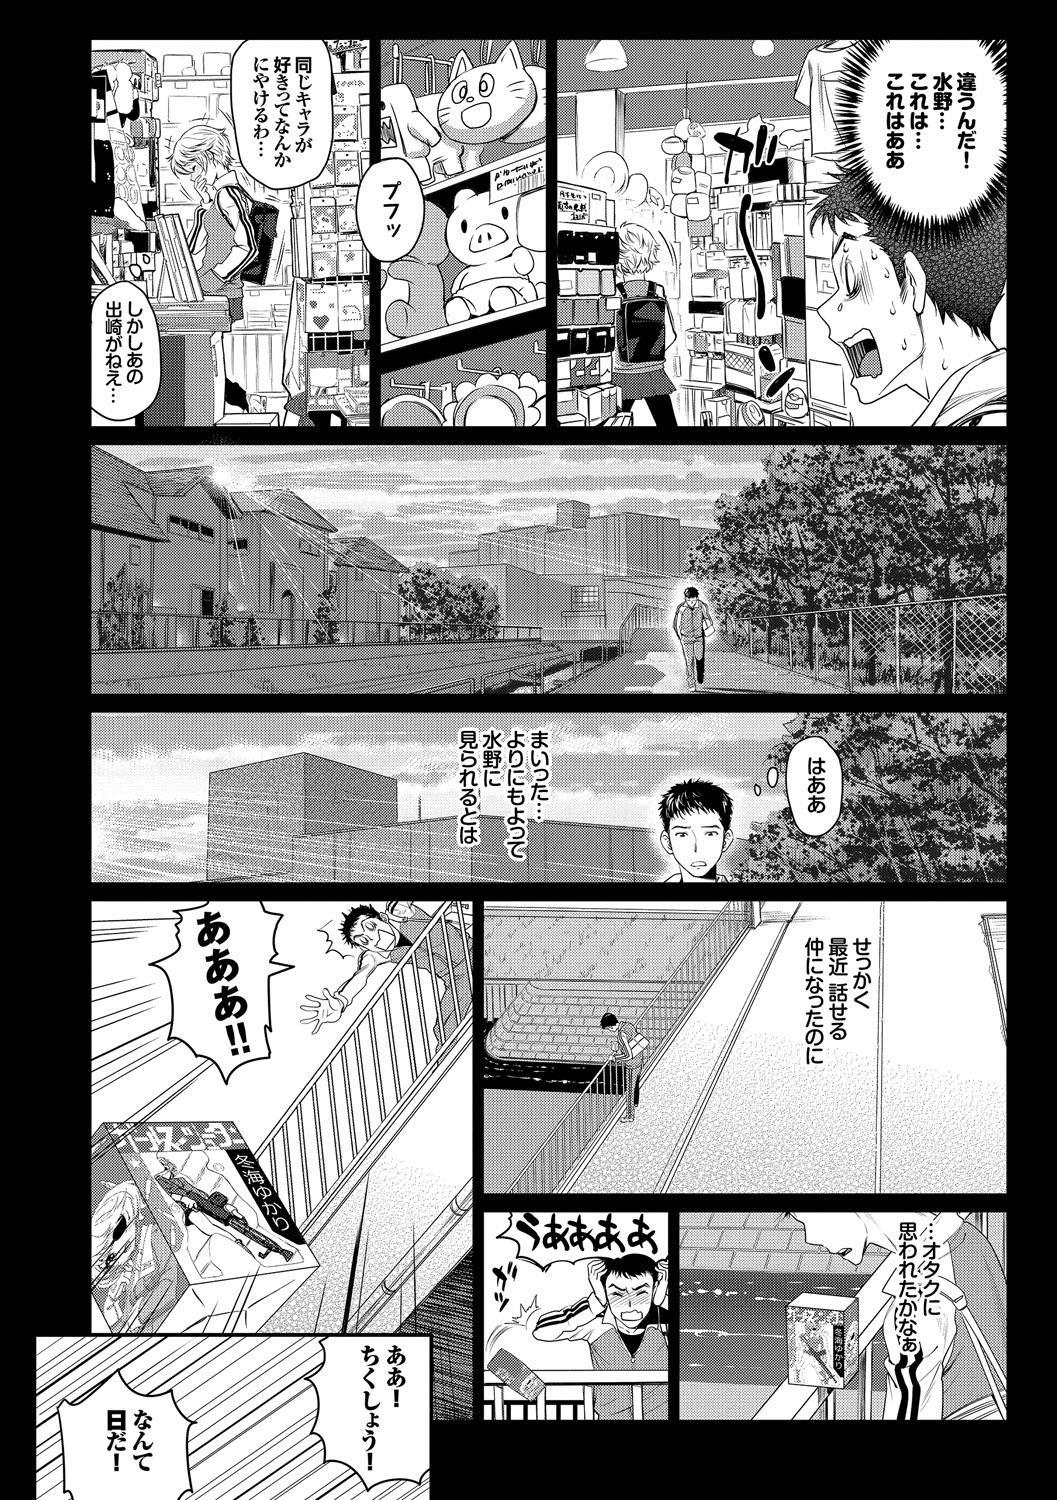 Indo みんなでエッチ～らぶらぶ乱交編～ Grosso - Page 5